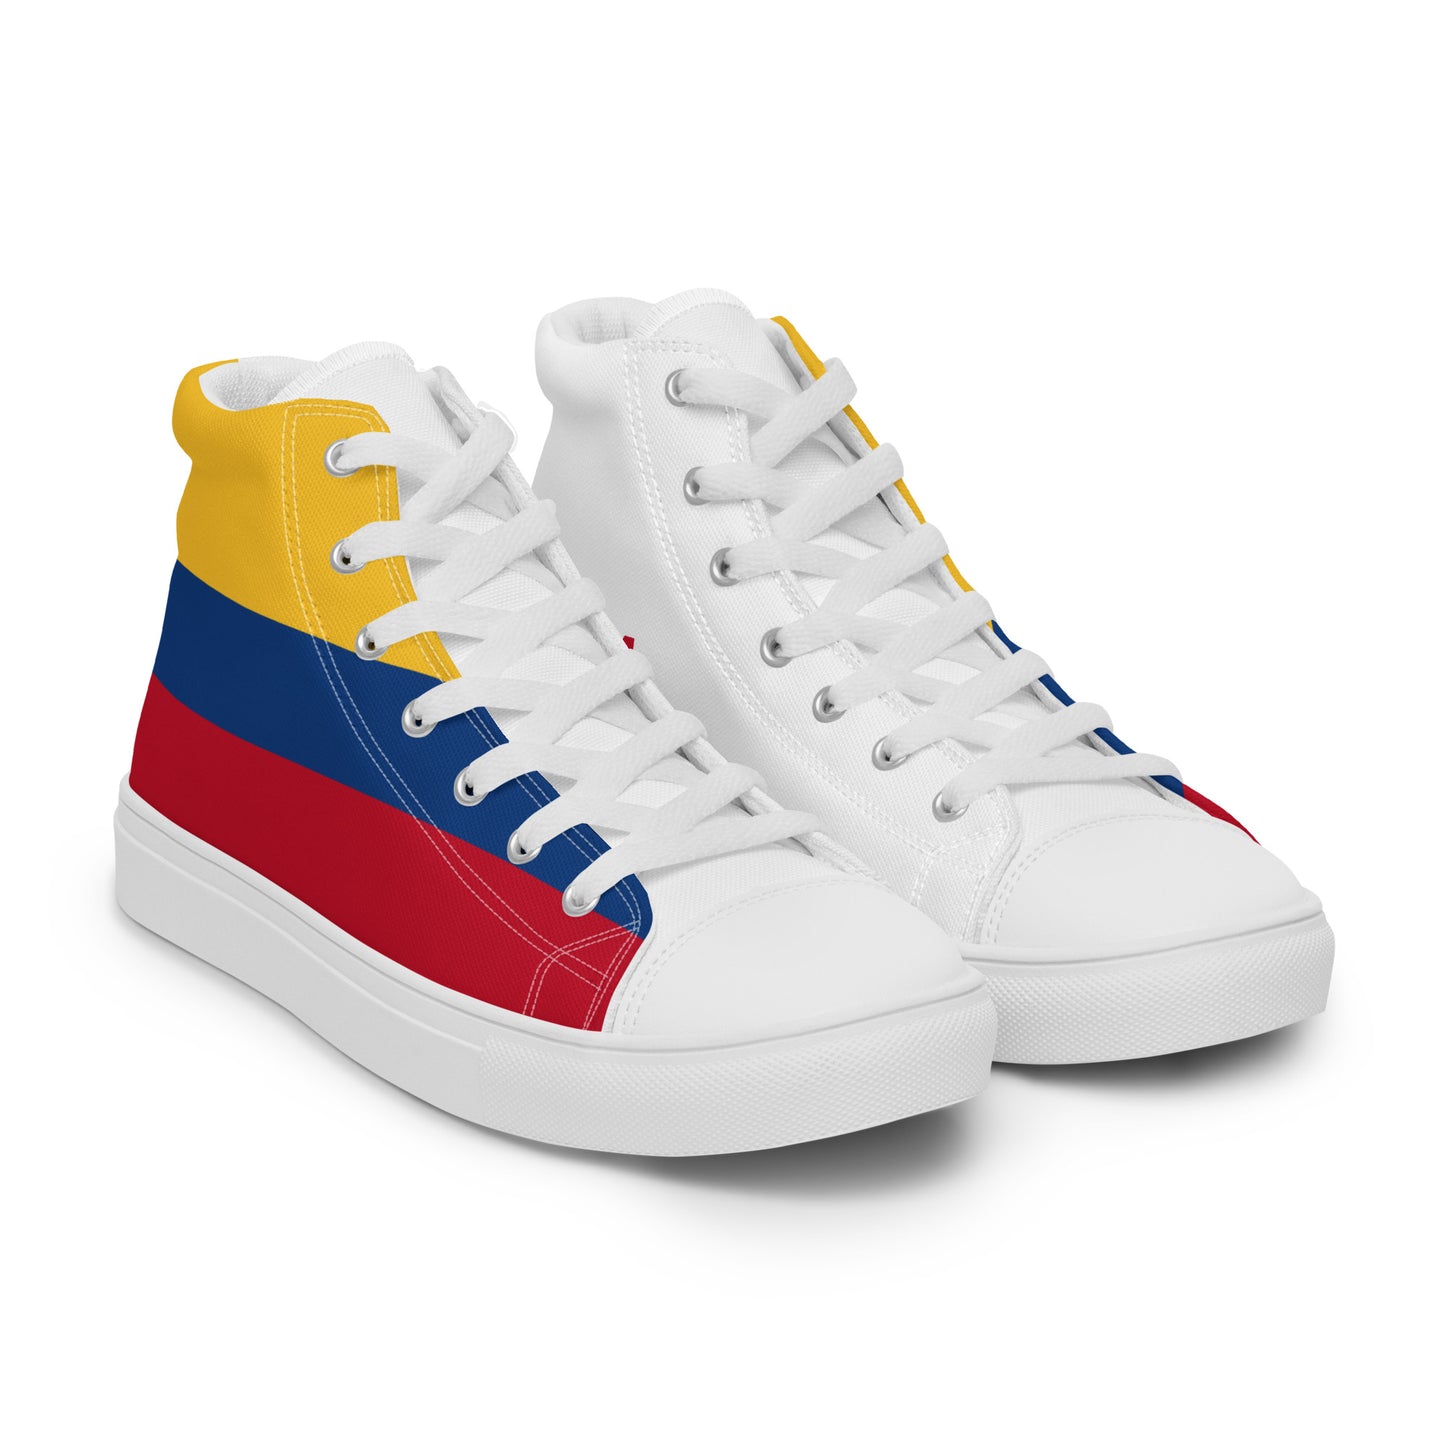 Colombia - Women - Bandera - High top shoes